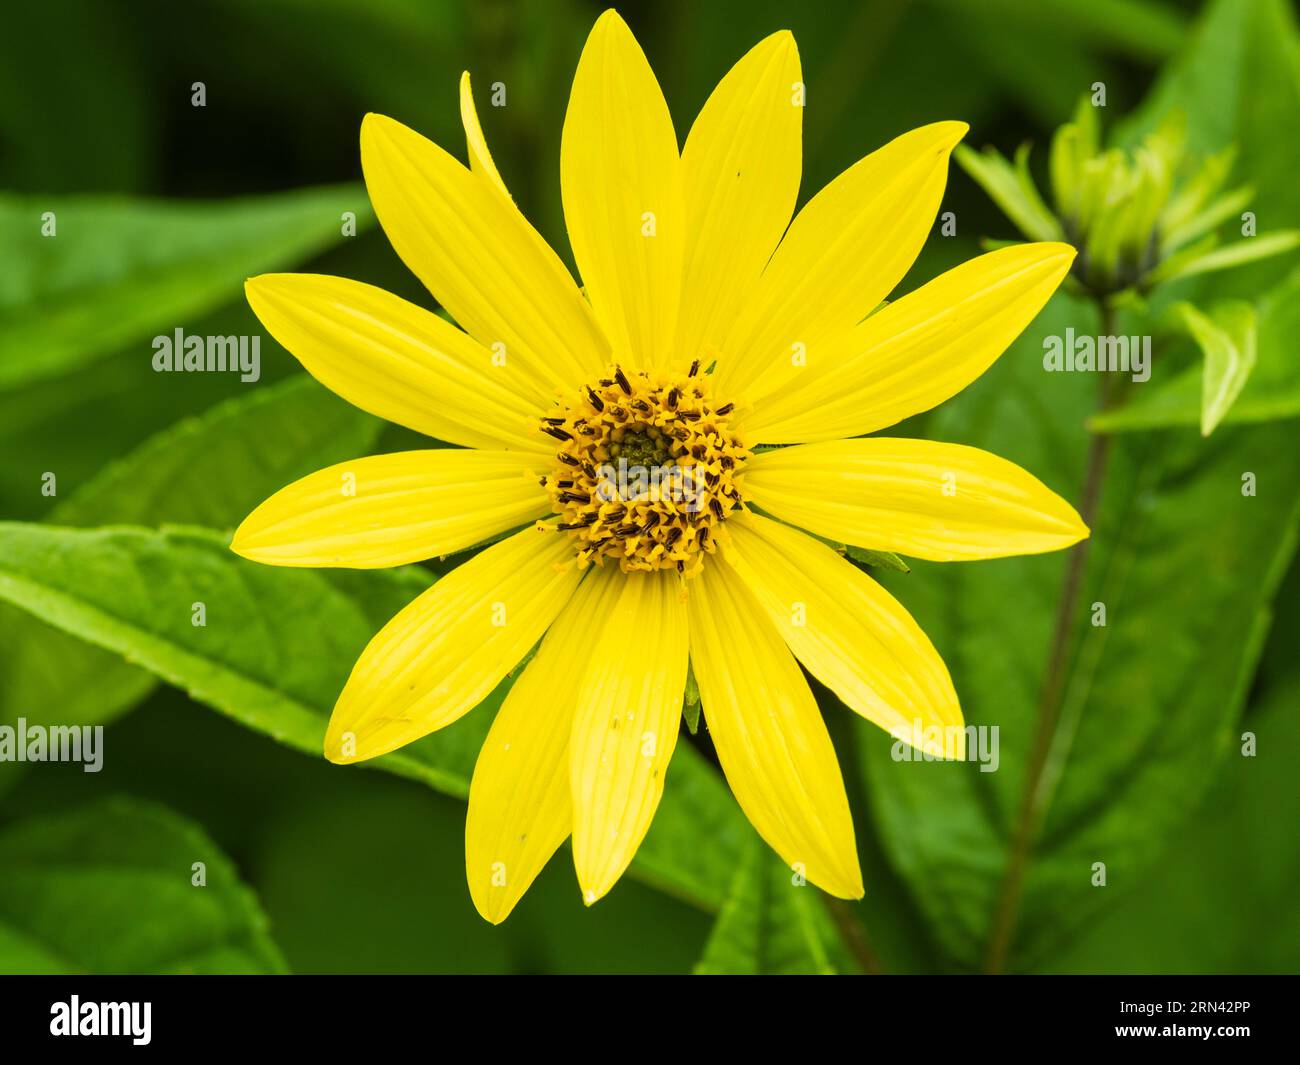 Lemon yellow flower of the tall growing, late summer to early Autumn flowering perennial, Helianthus 'Lemon Queen' Stock Photo